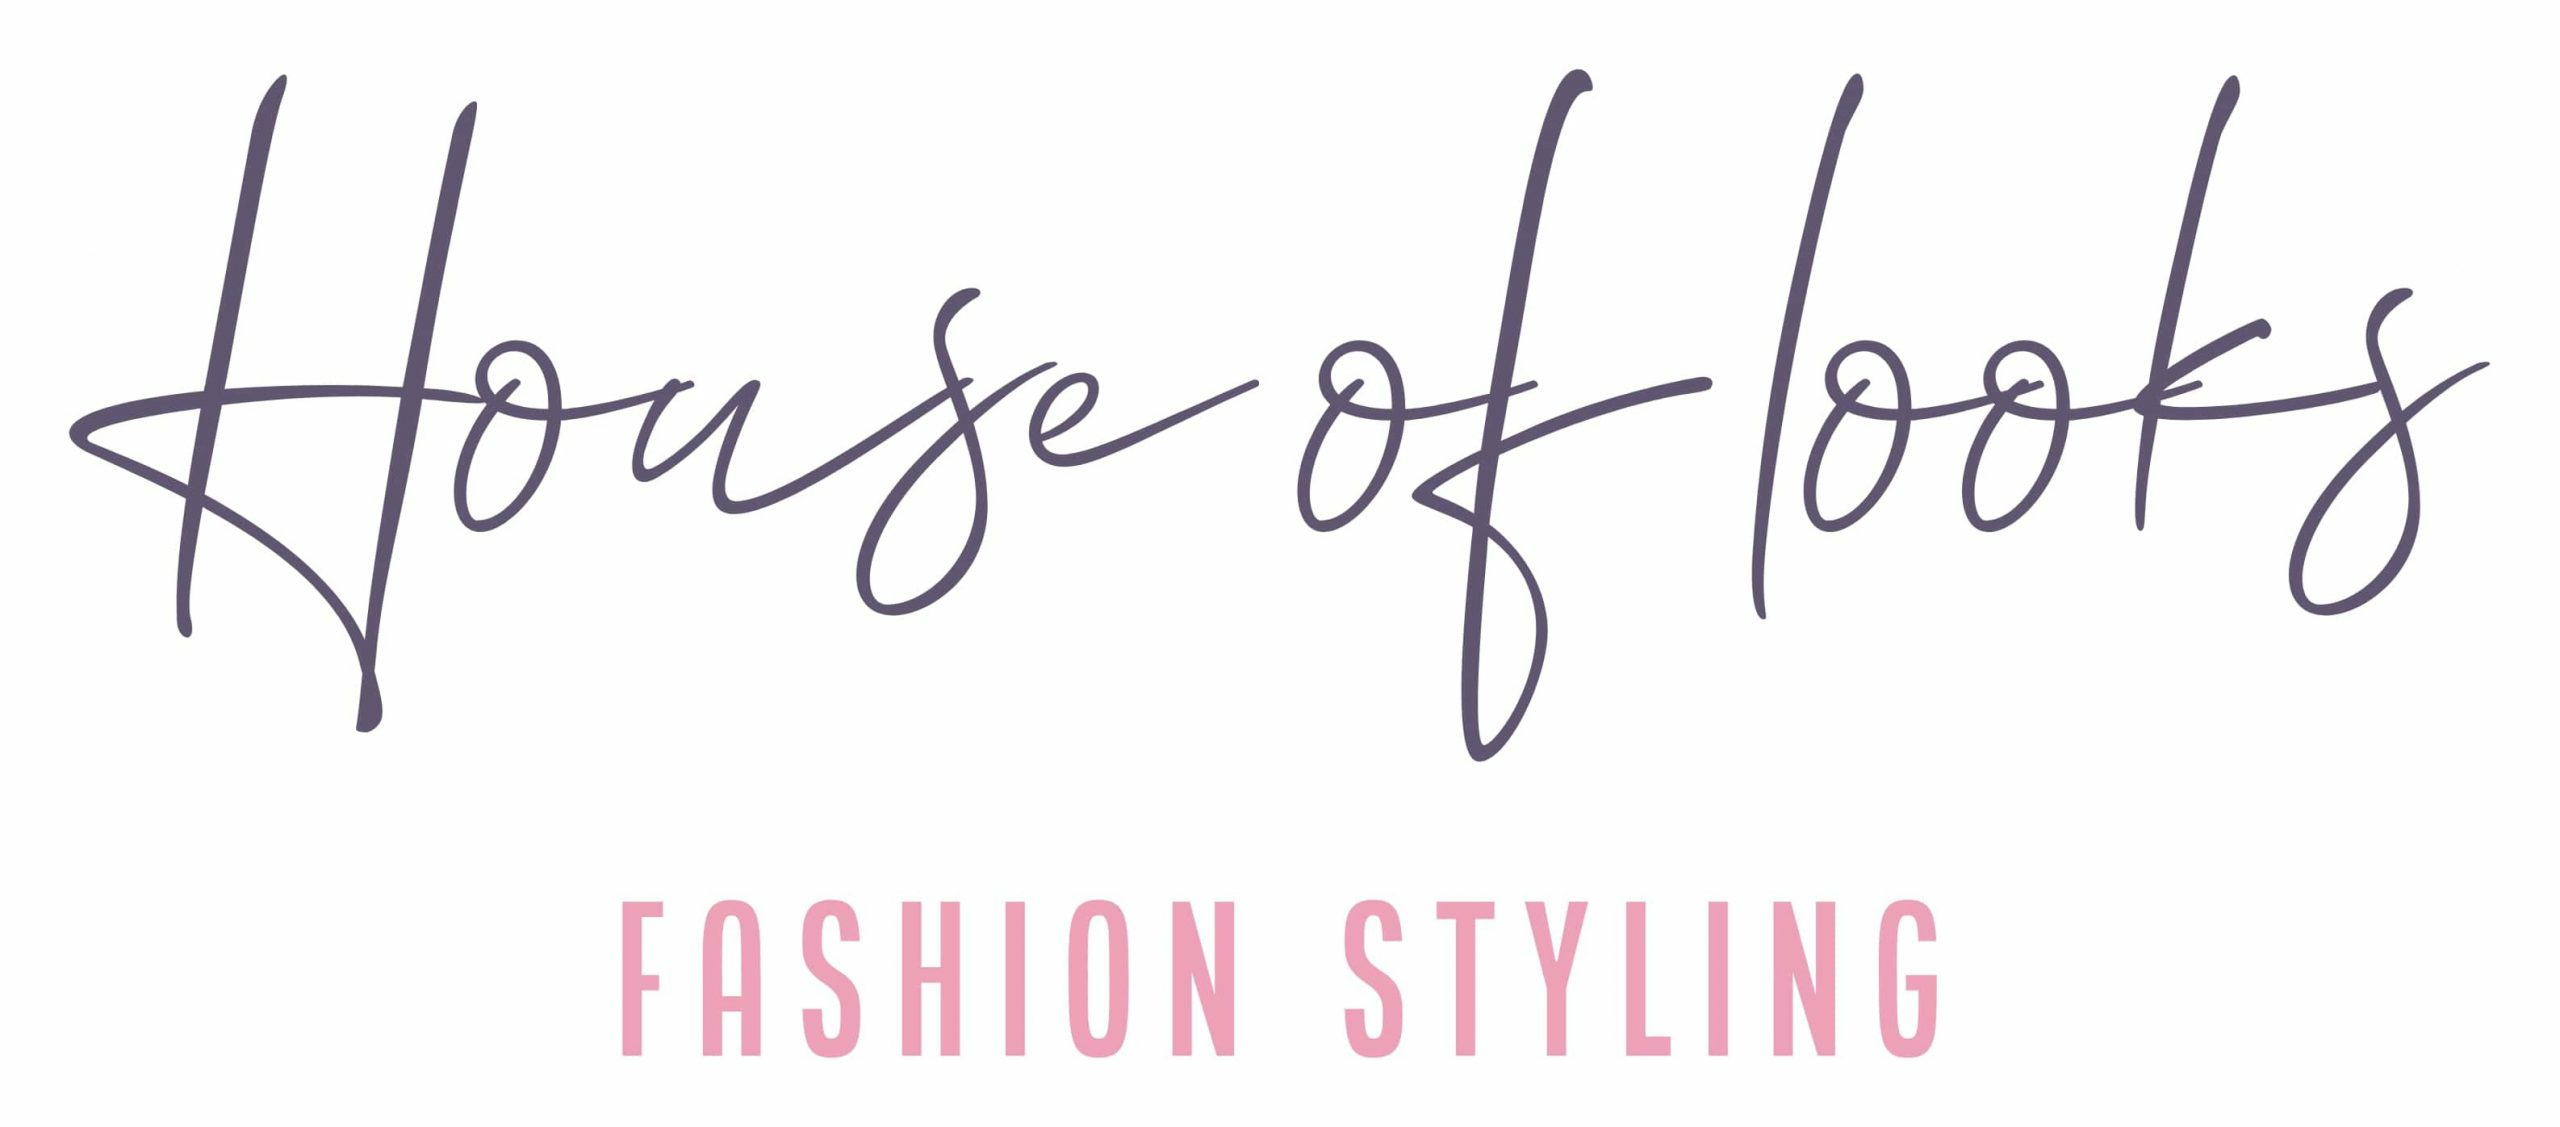 House of looks modestyling logo